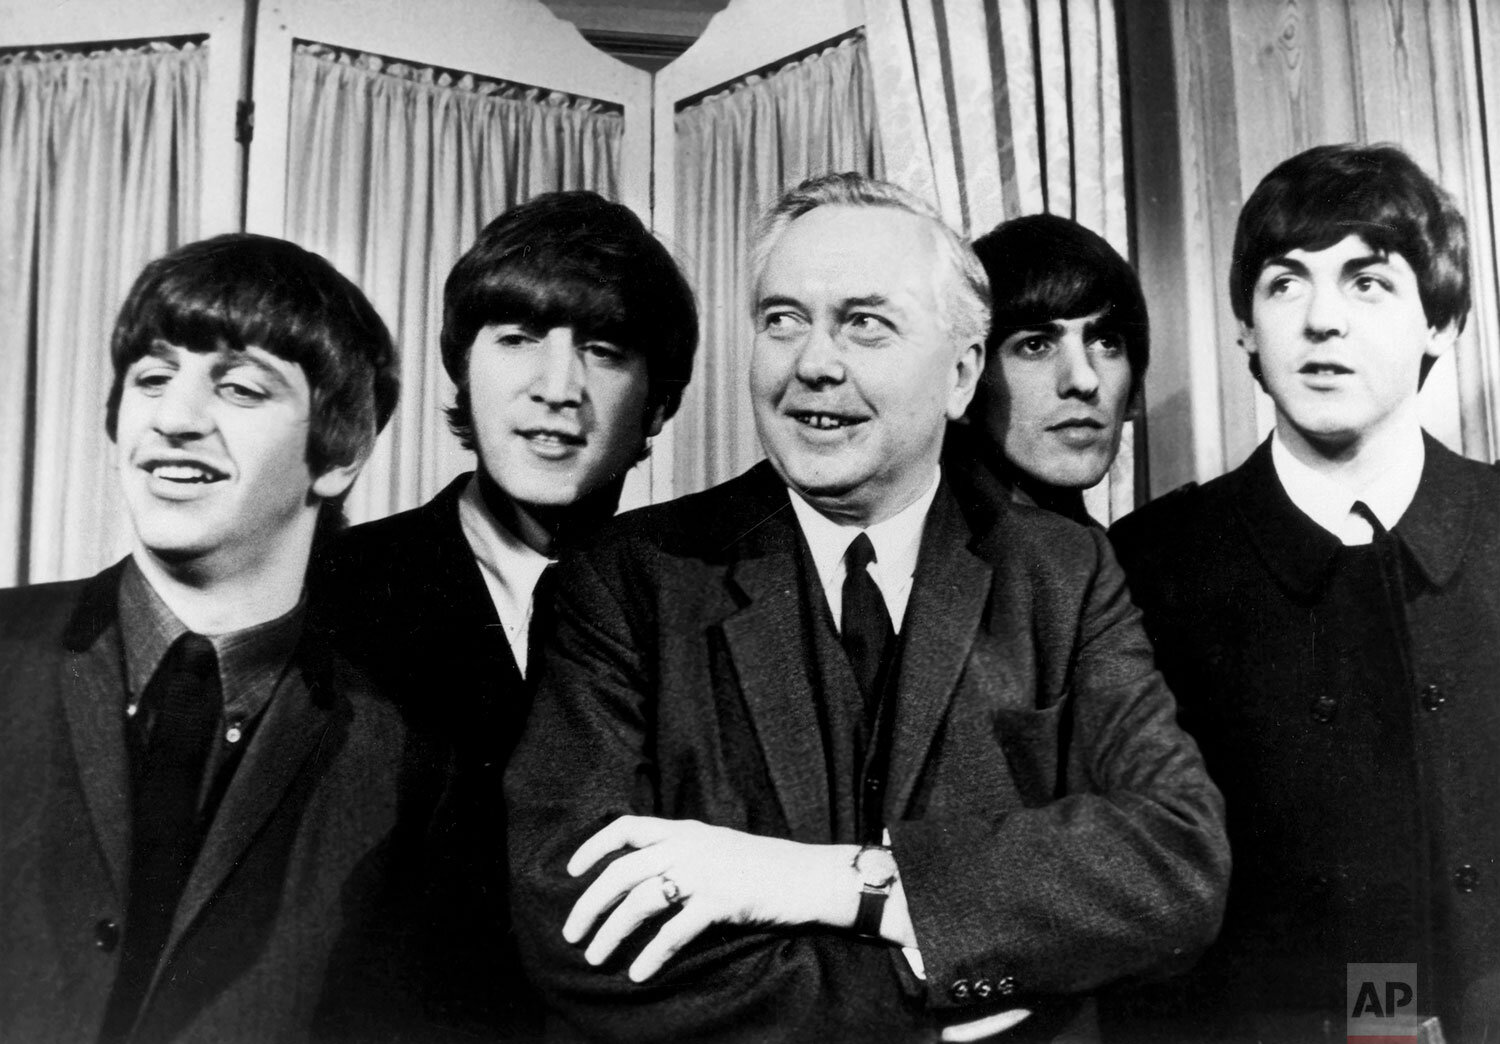  Labour Party leader Harold Wilson is pictured with The Beatles, from left, Ringo Starr, John Lennon, George Harrison and Paul McCartney, during the Variety Club of Great Britain's "Show Business Personality" presentation ceremony at the Dorchester H